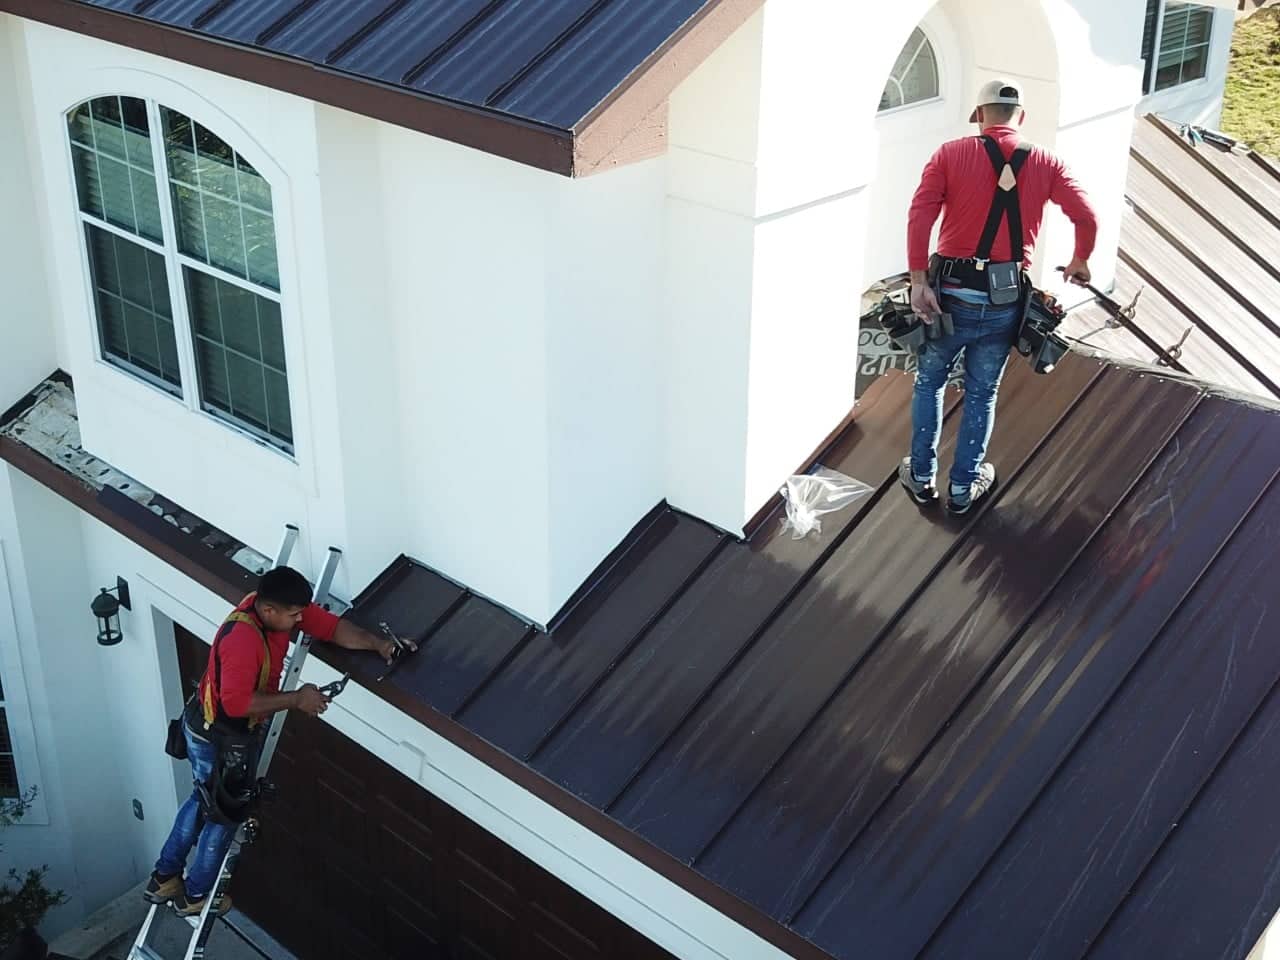 Boerne roofing business near me